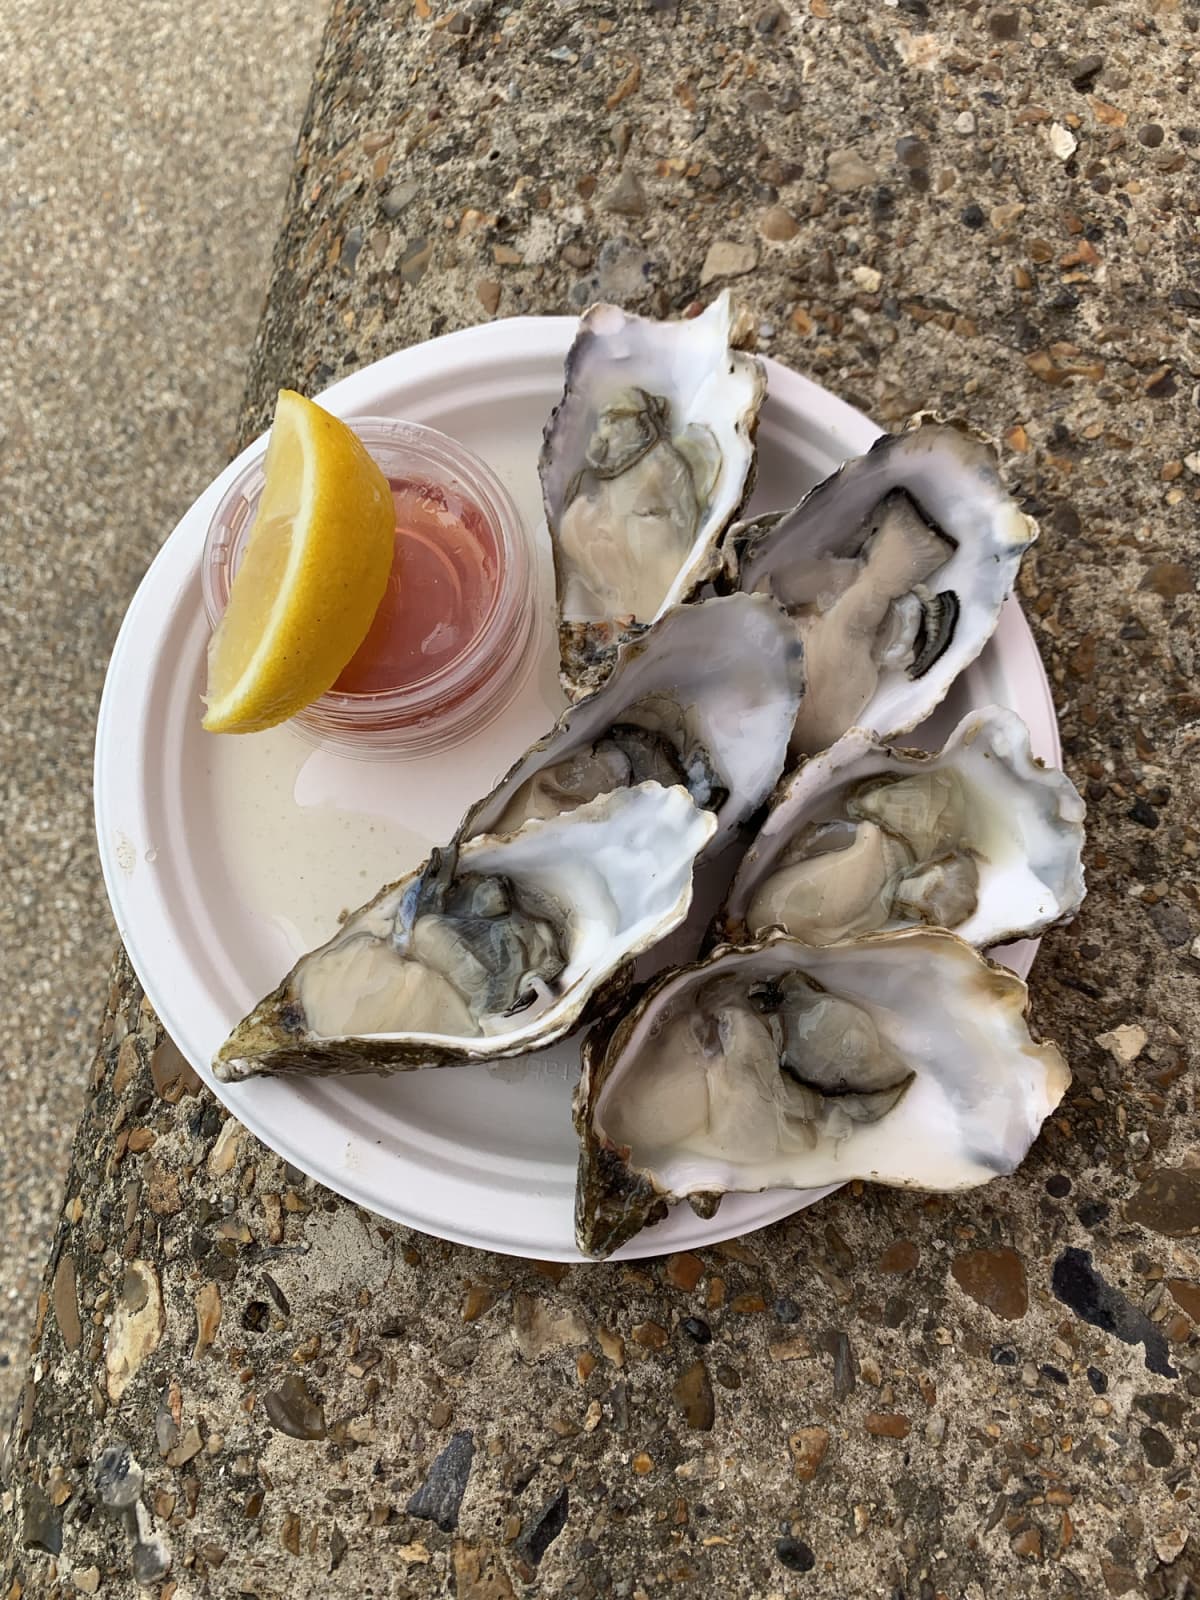 A breakfast of Oysters on the beach